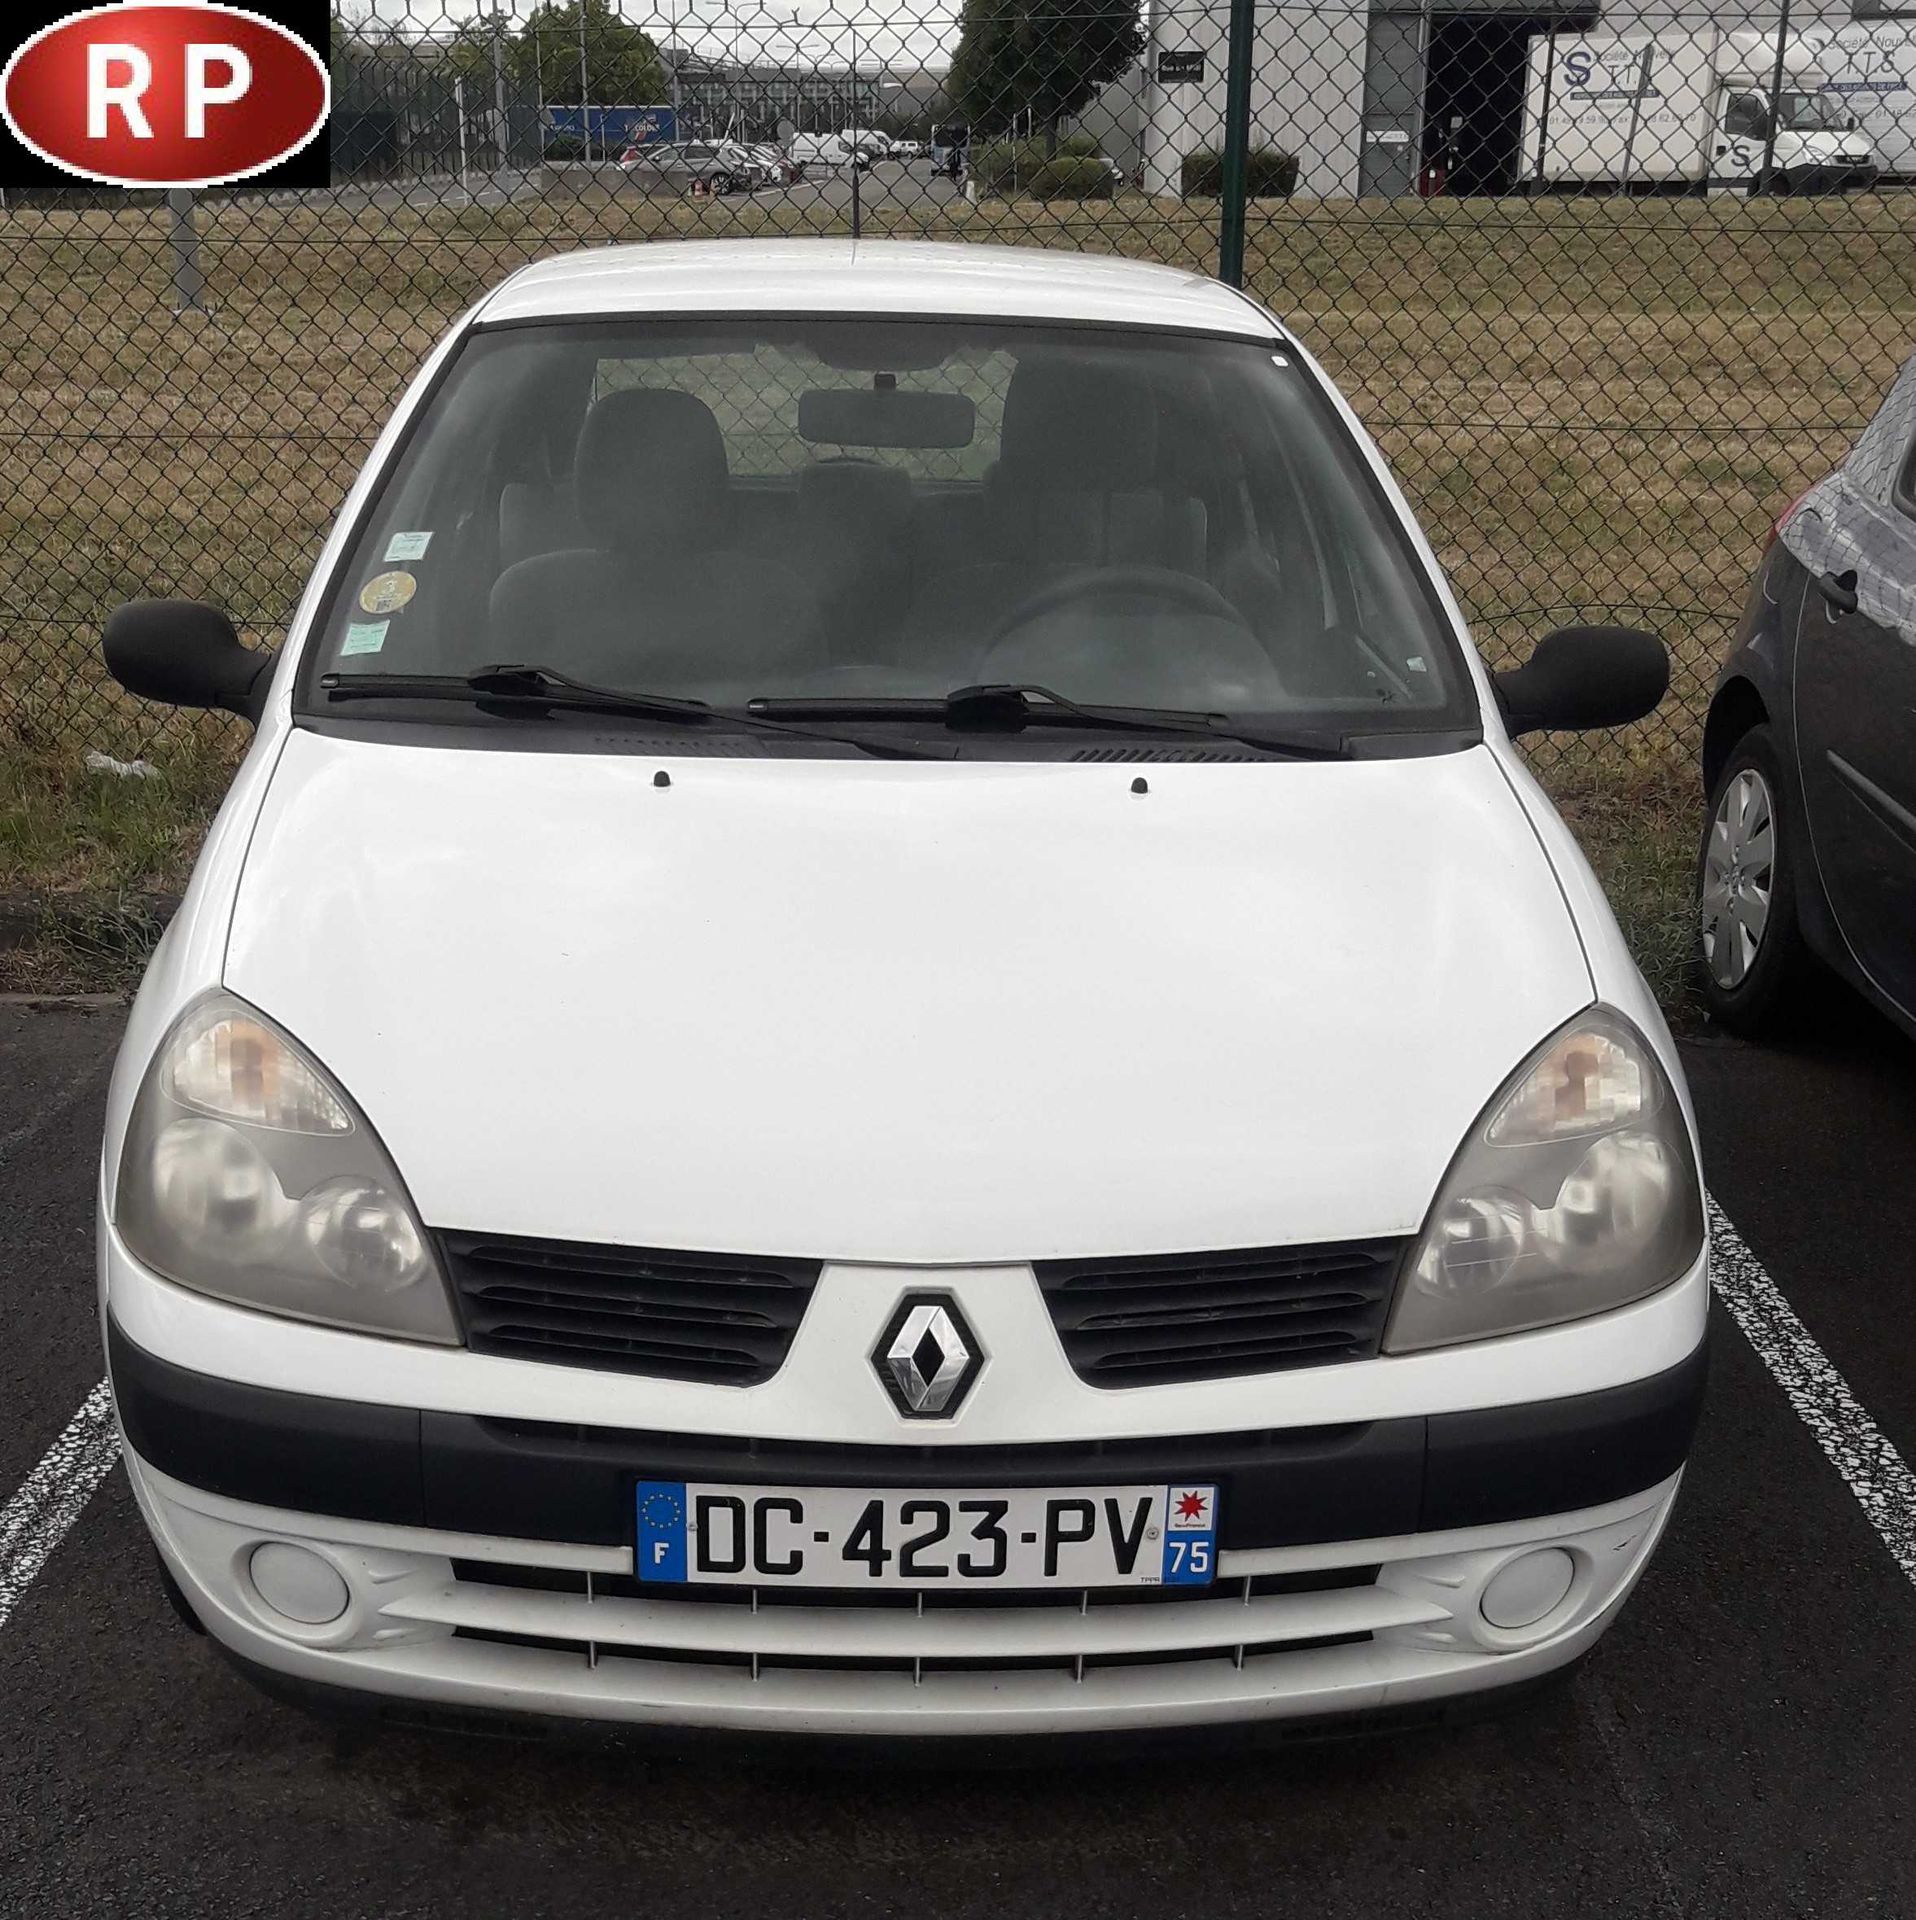 Null [RP] RENAULT Clio 1.2 i 60, Essence, imm. DC-423-PV, type MRE1012EE457, n° &hellip;